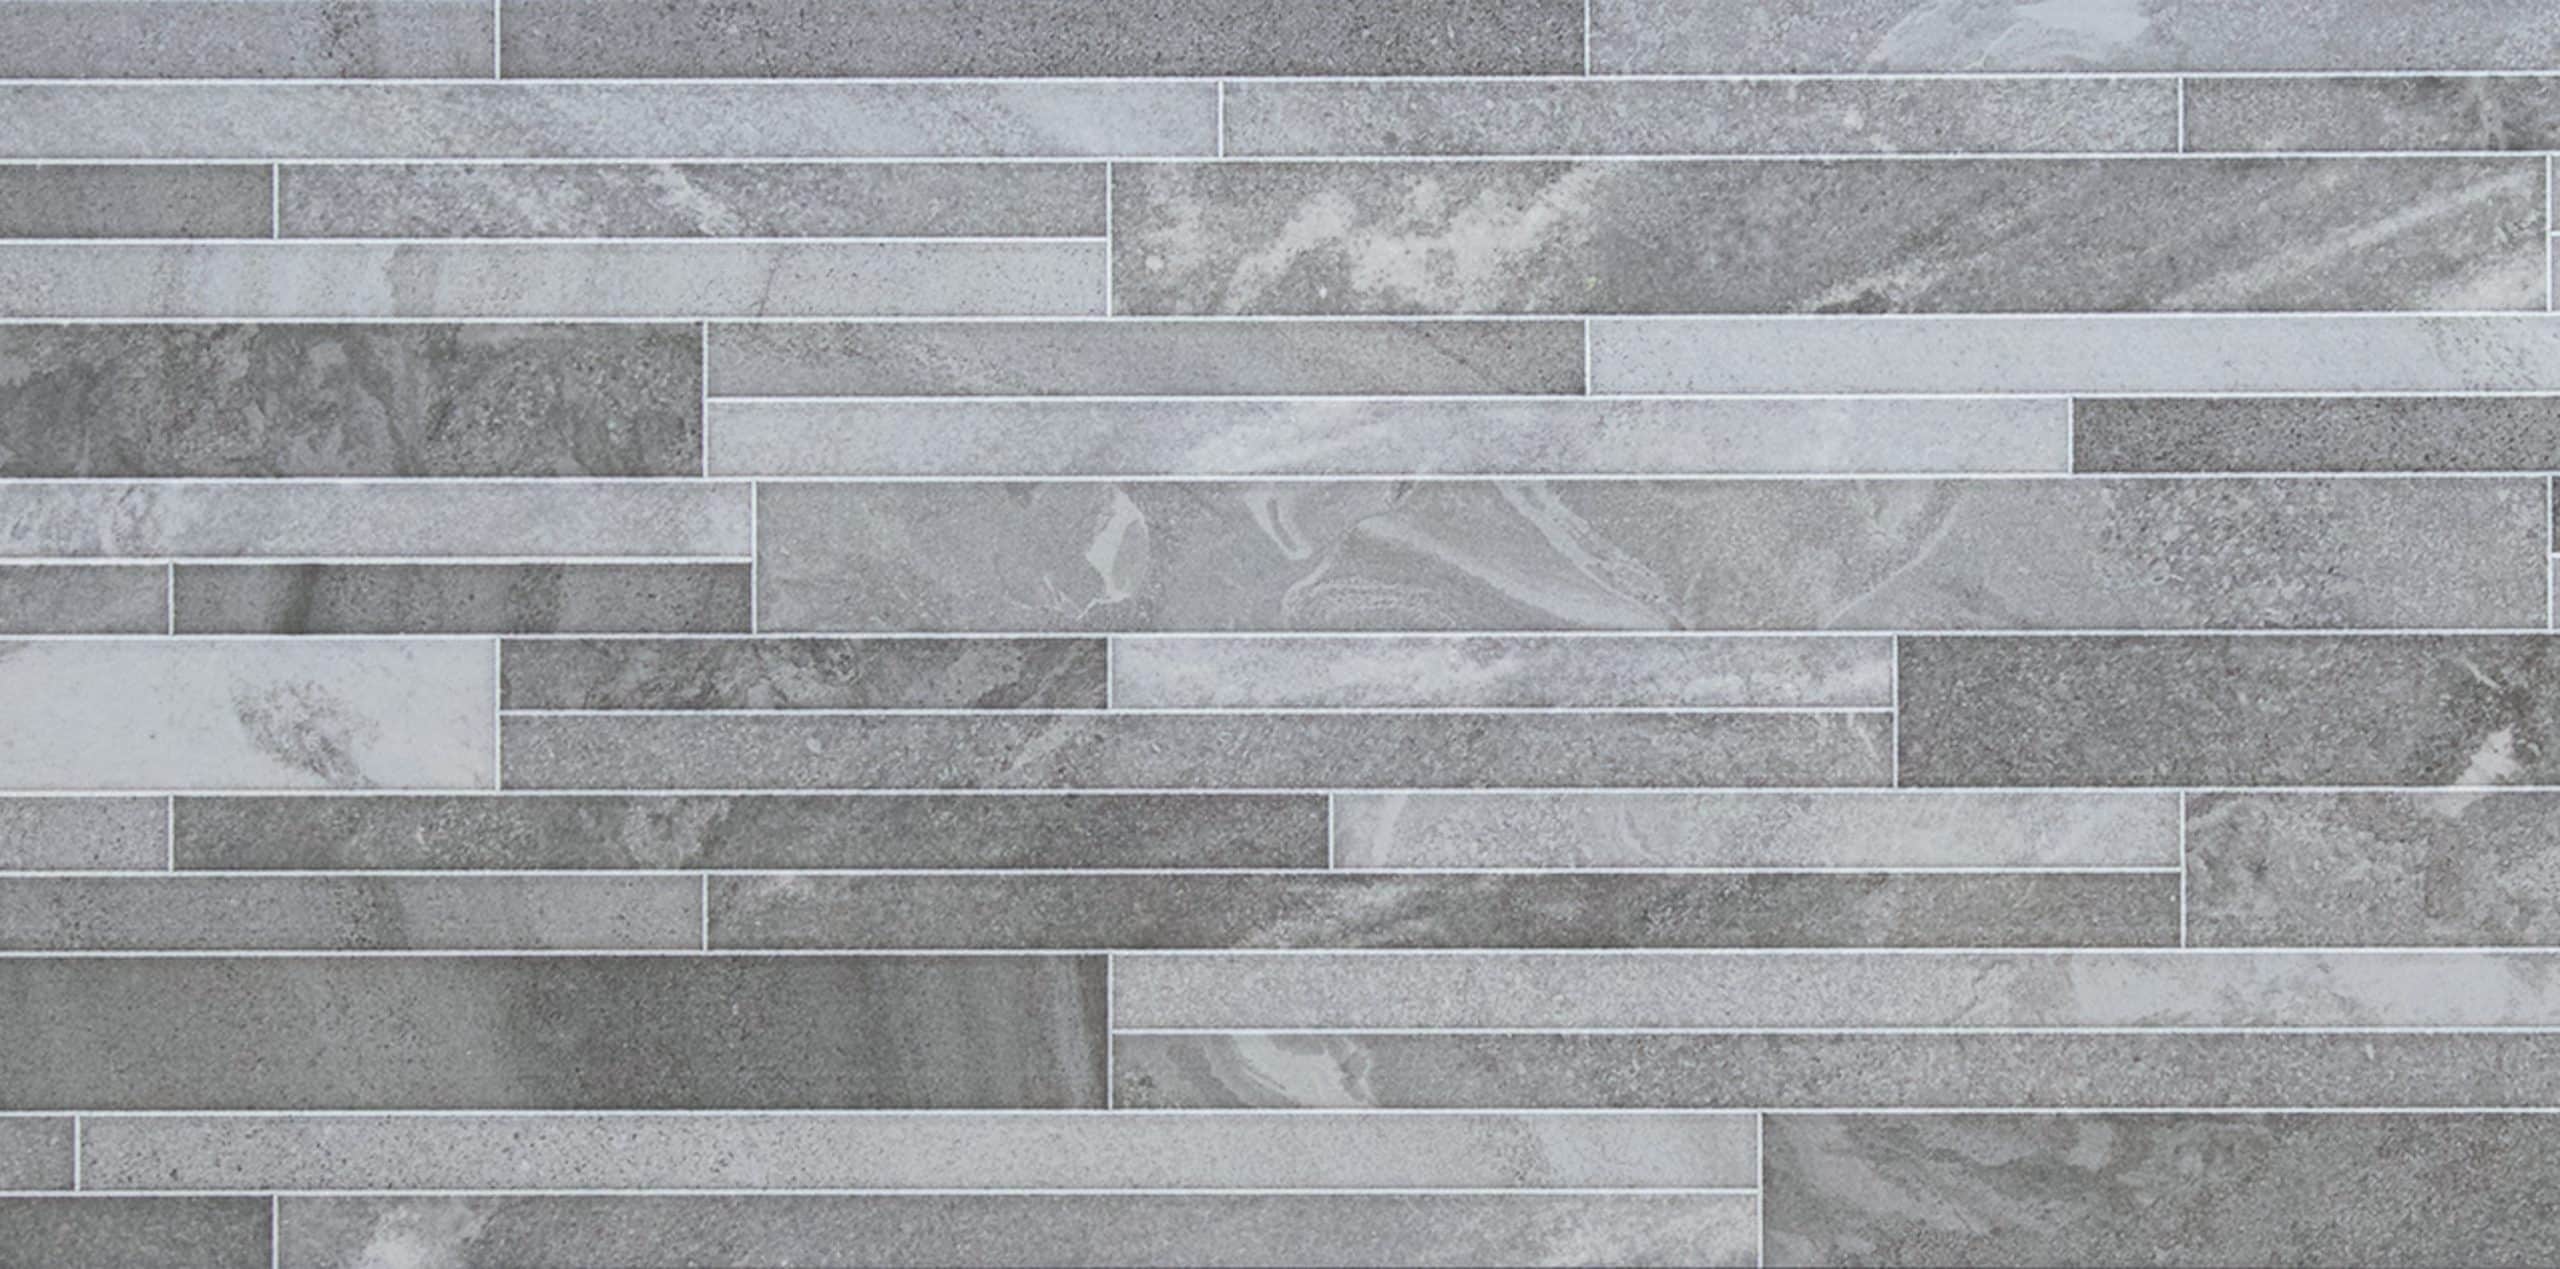 Scirocco, a beautifully designed and scaled tile available at Tile and Stone Gallery